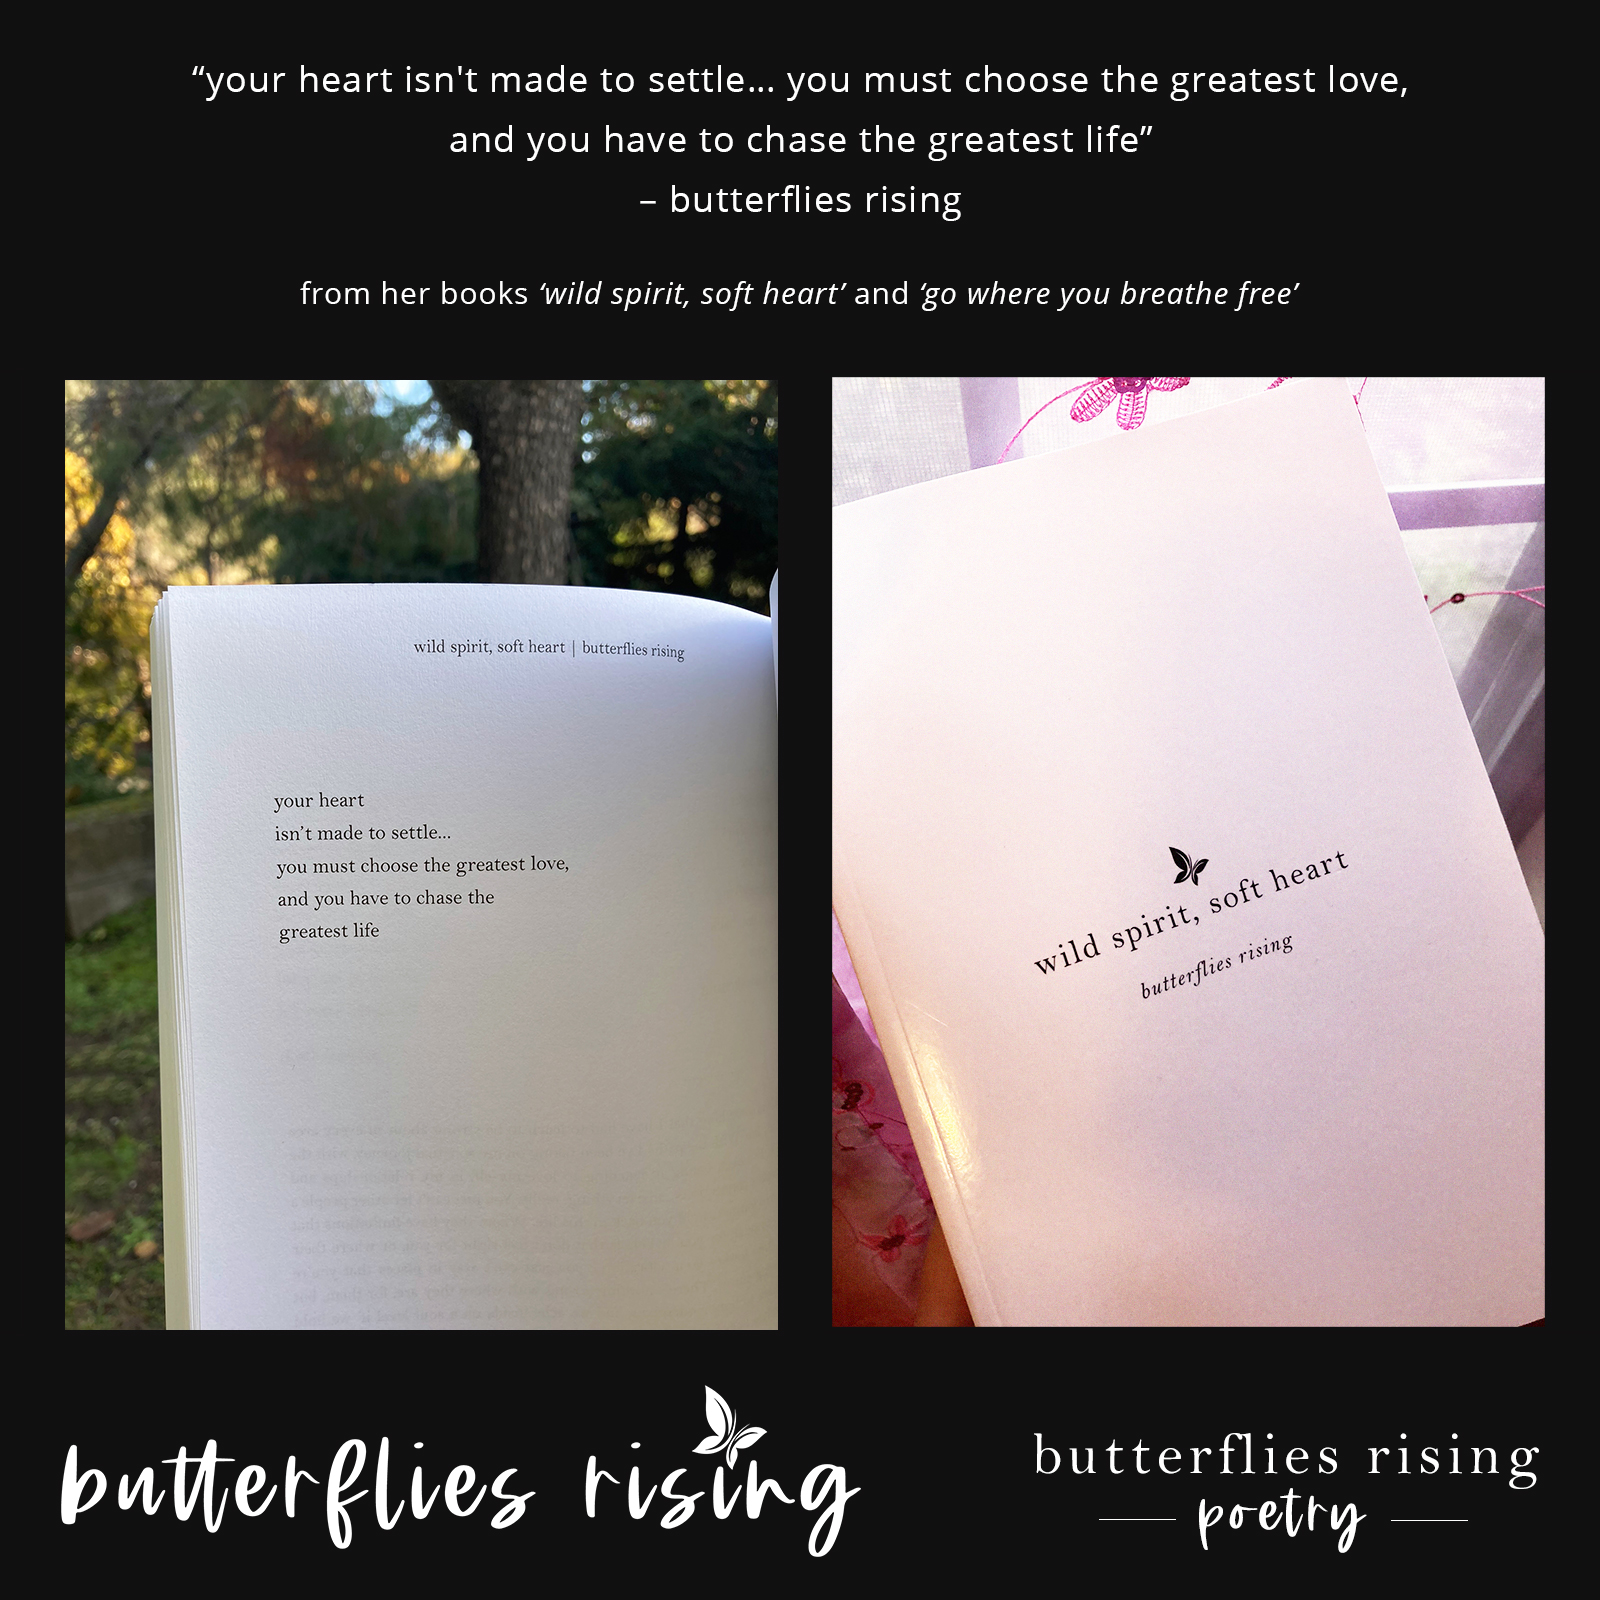 your heart isn't made to settle... you must choose the greatest love, and you have to chase the greatest life - butterflies rising